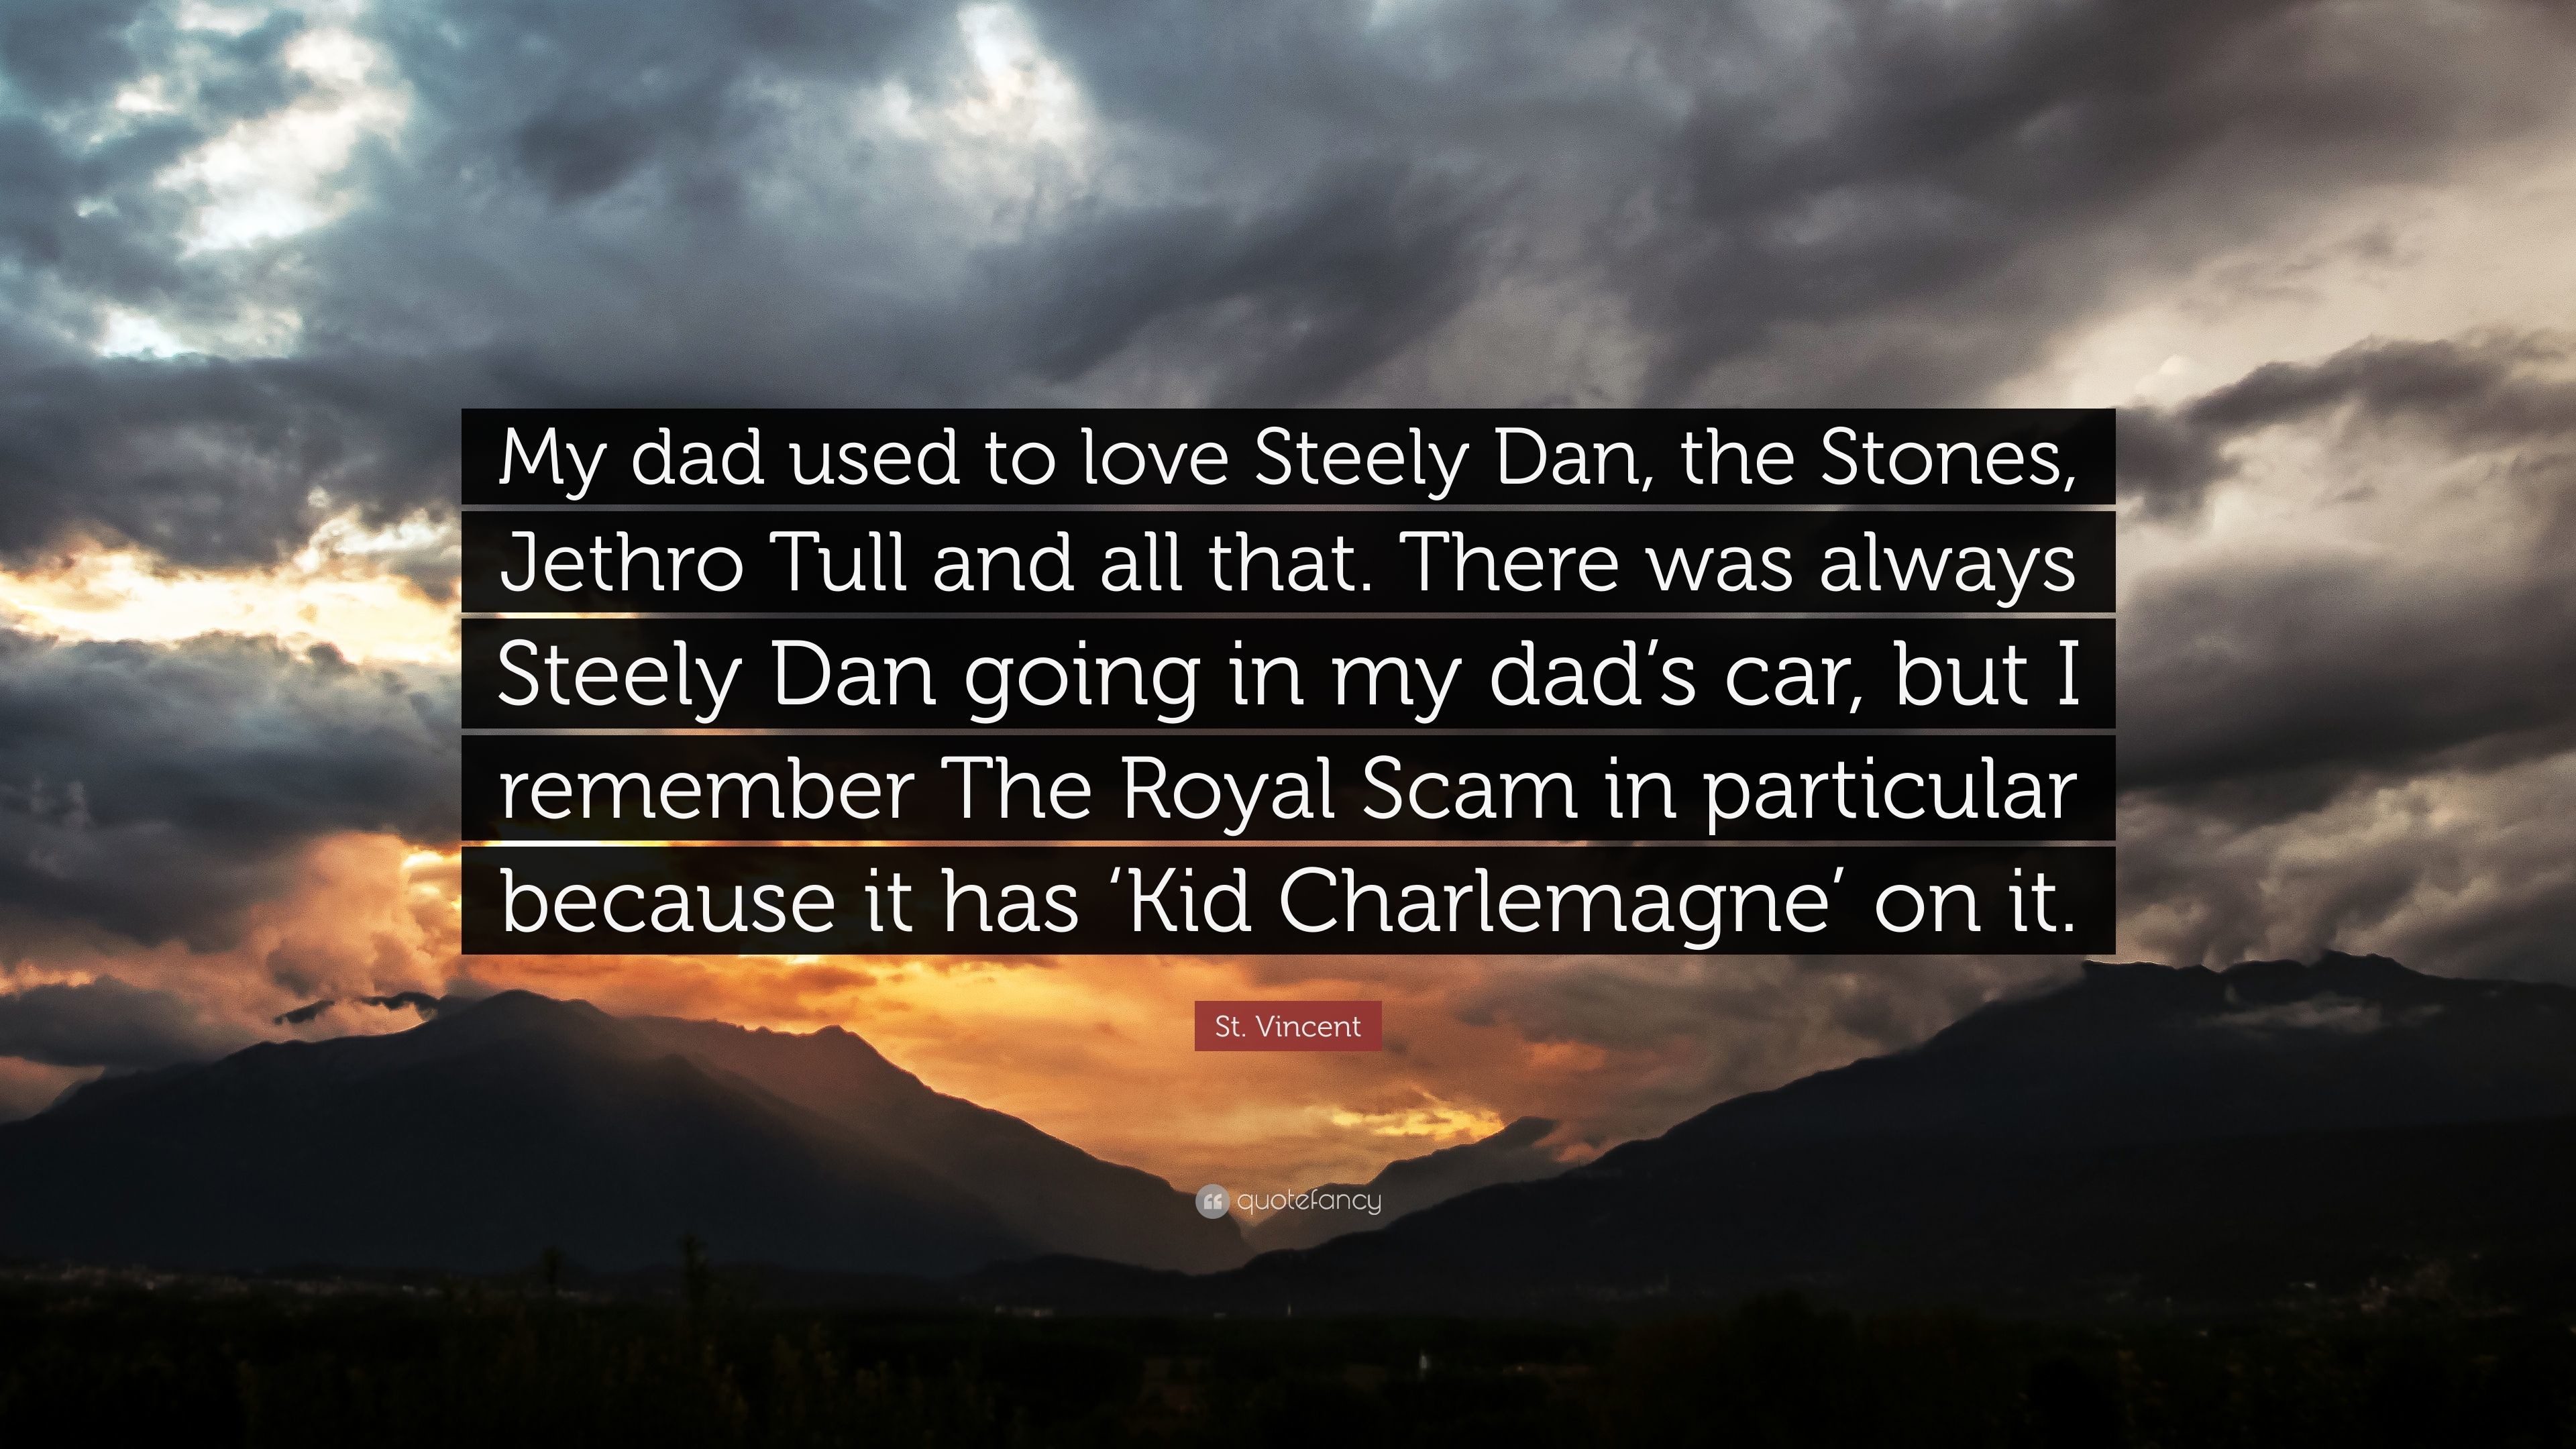 3840x2160 St. Vincent Quote: “My dad used to love Steely Dan, the Stones